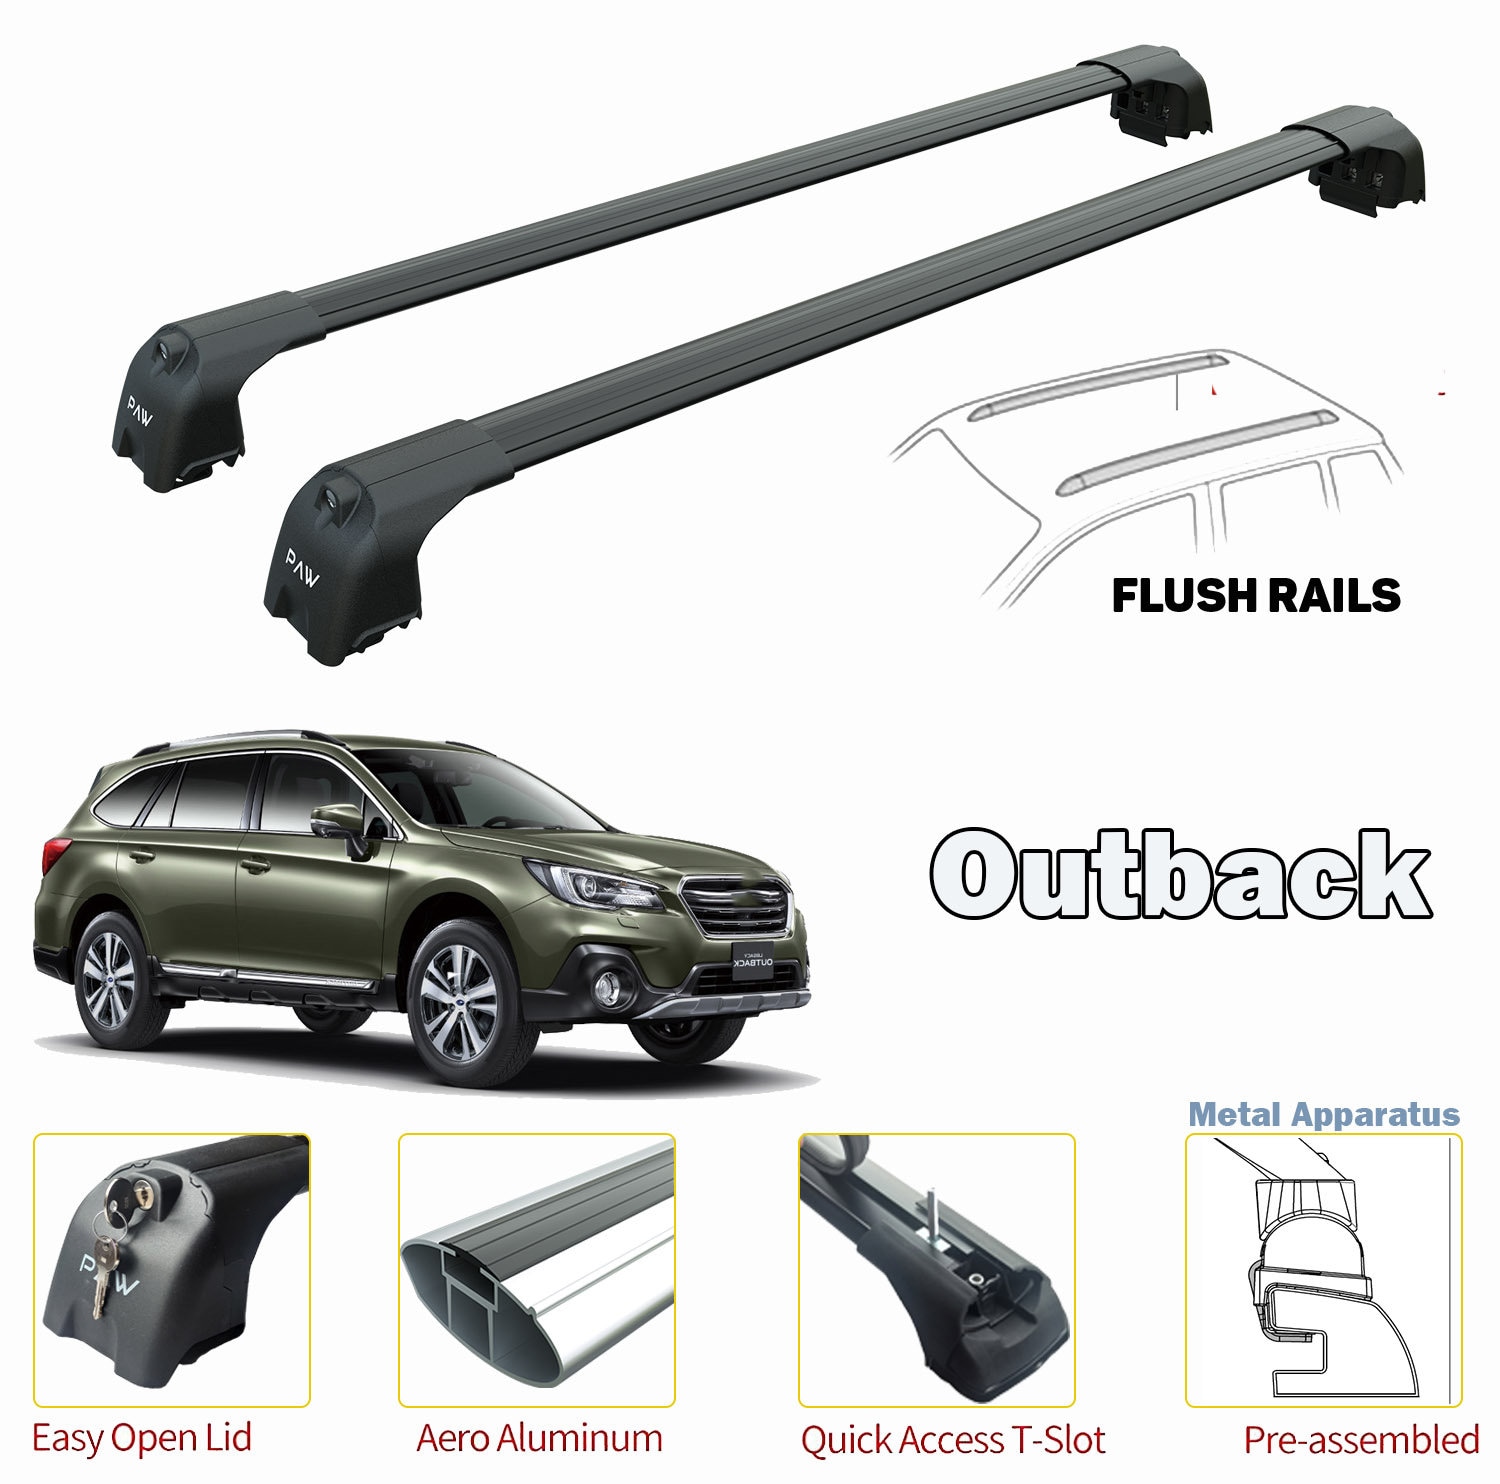 For Subaru Outback 2014-2020 Roof Rack System Carrier Cross Bars